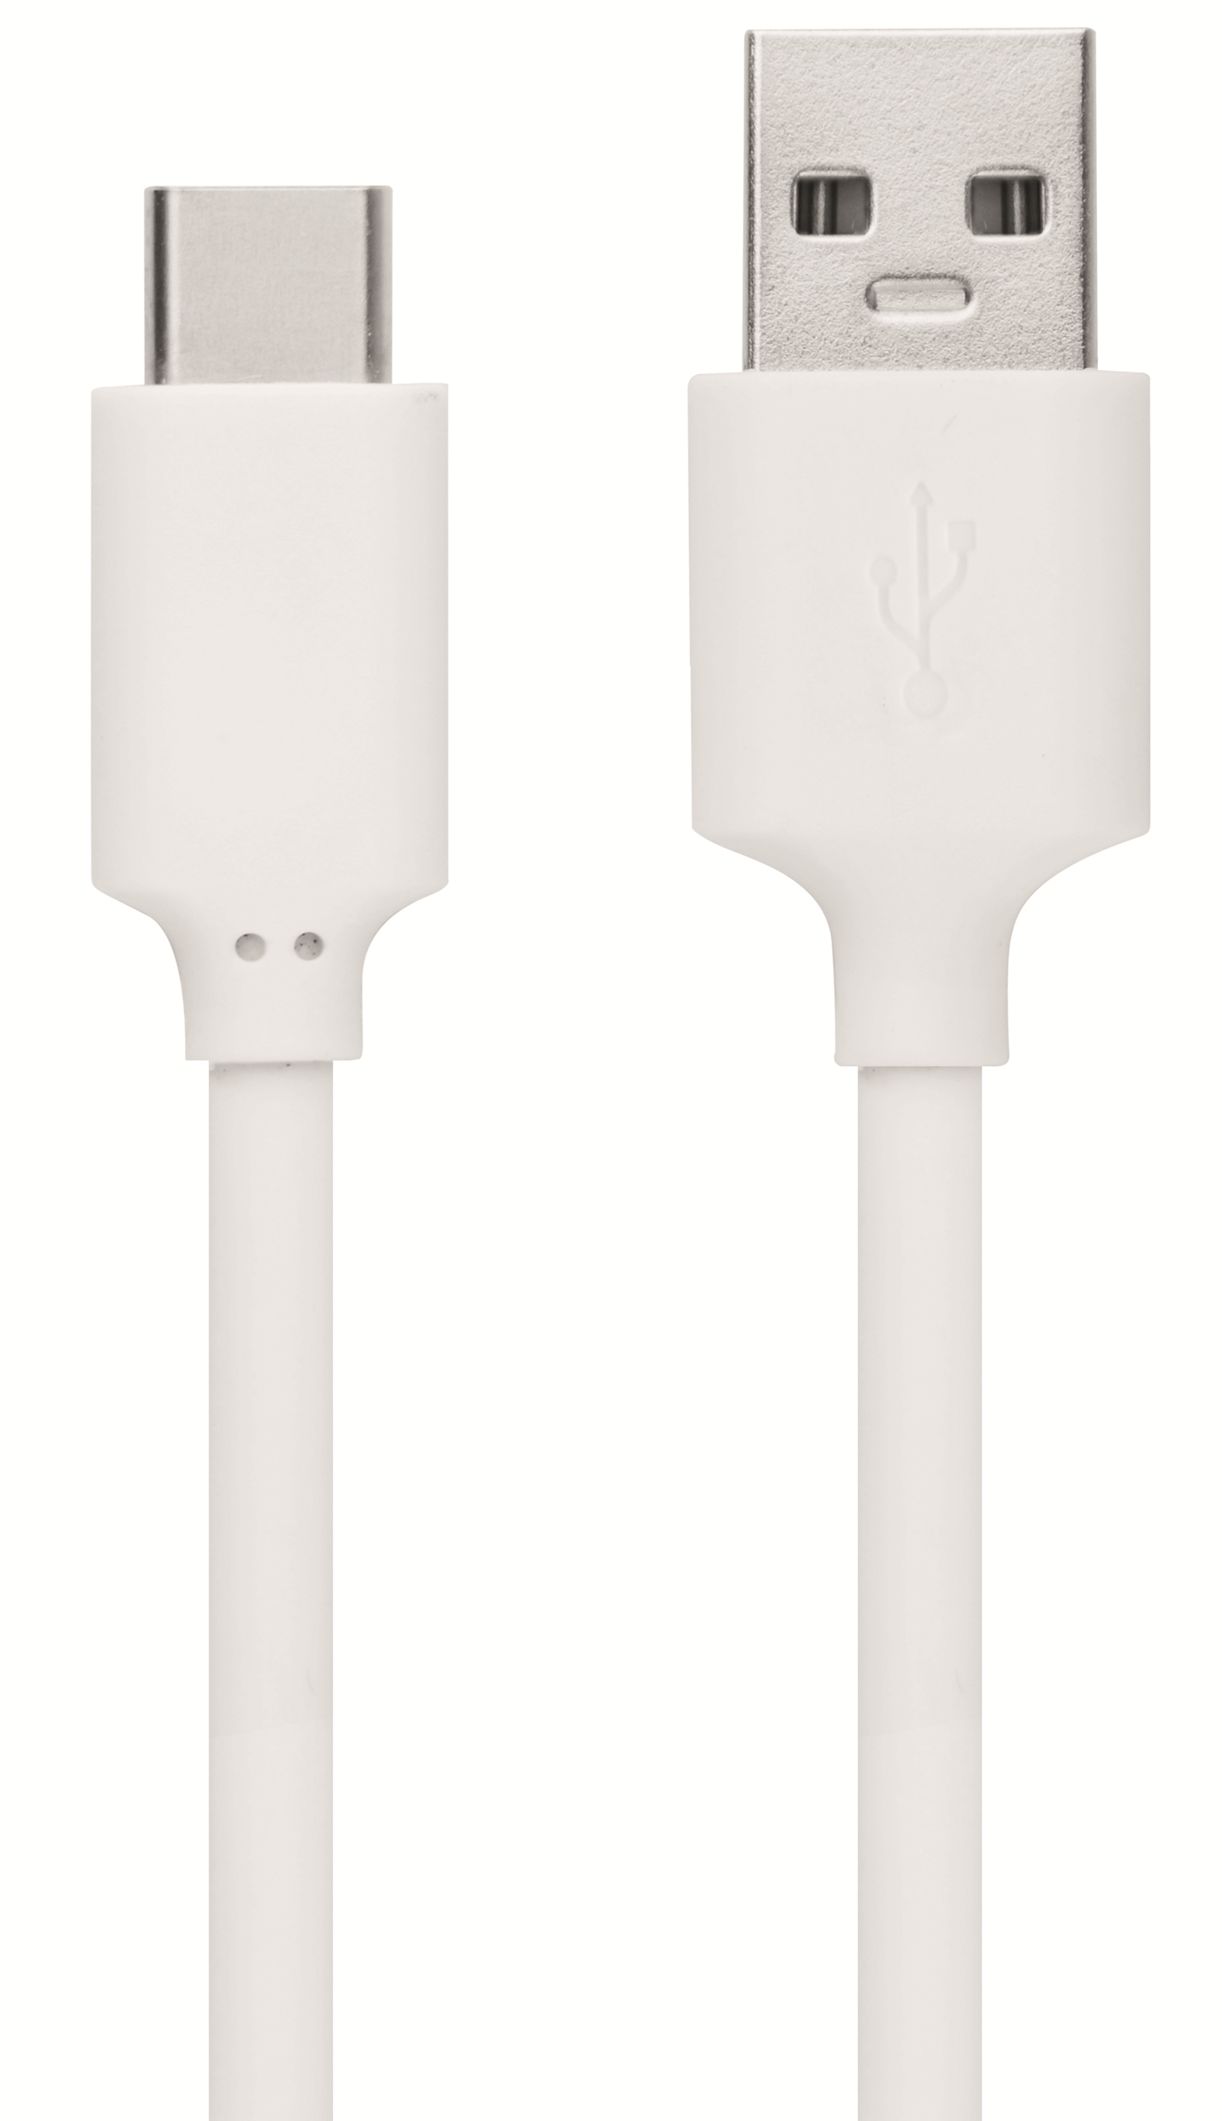 Snug Type-C USB Cable - Avail in: White